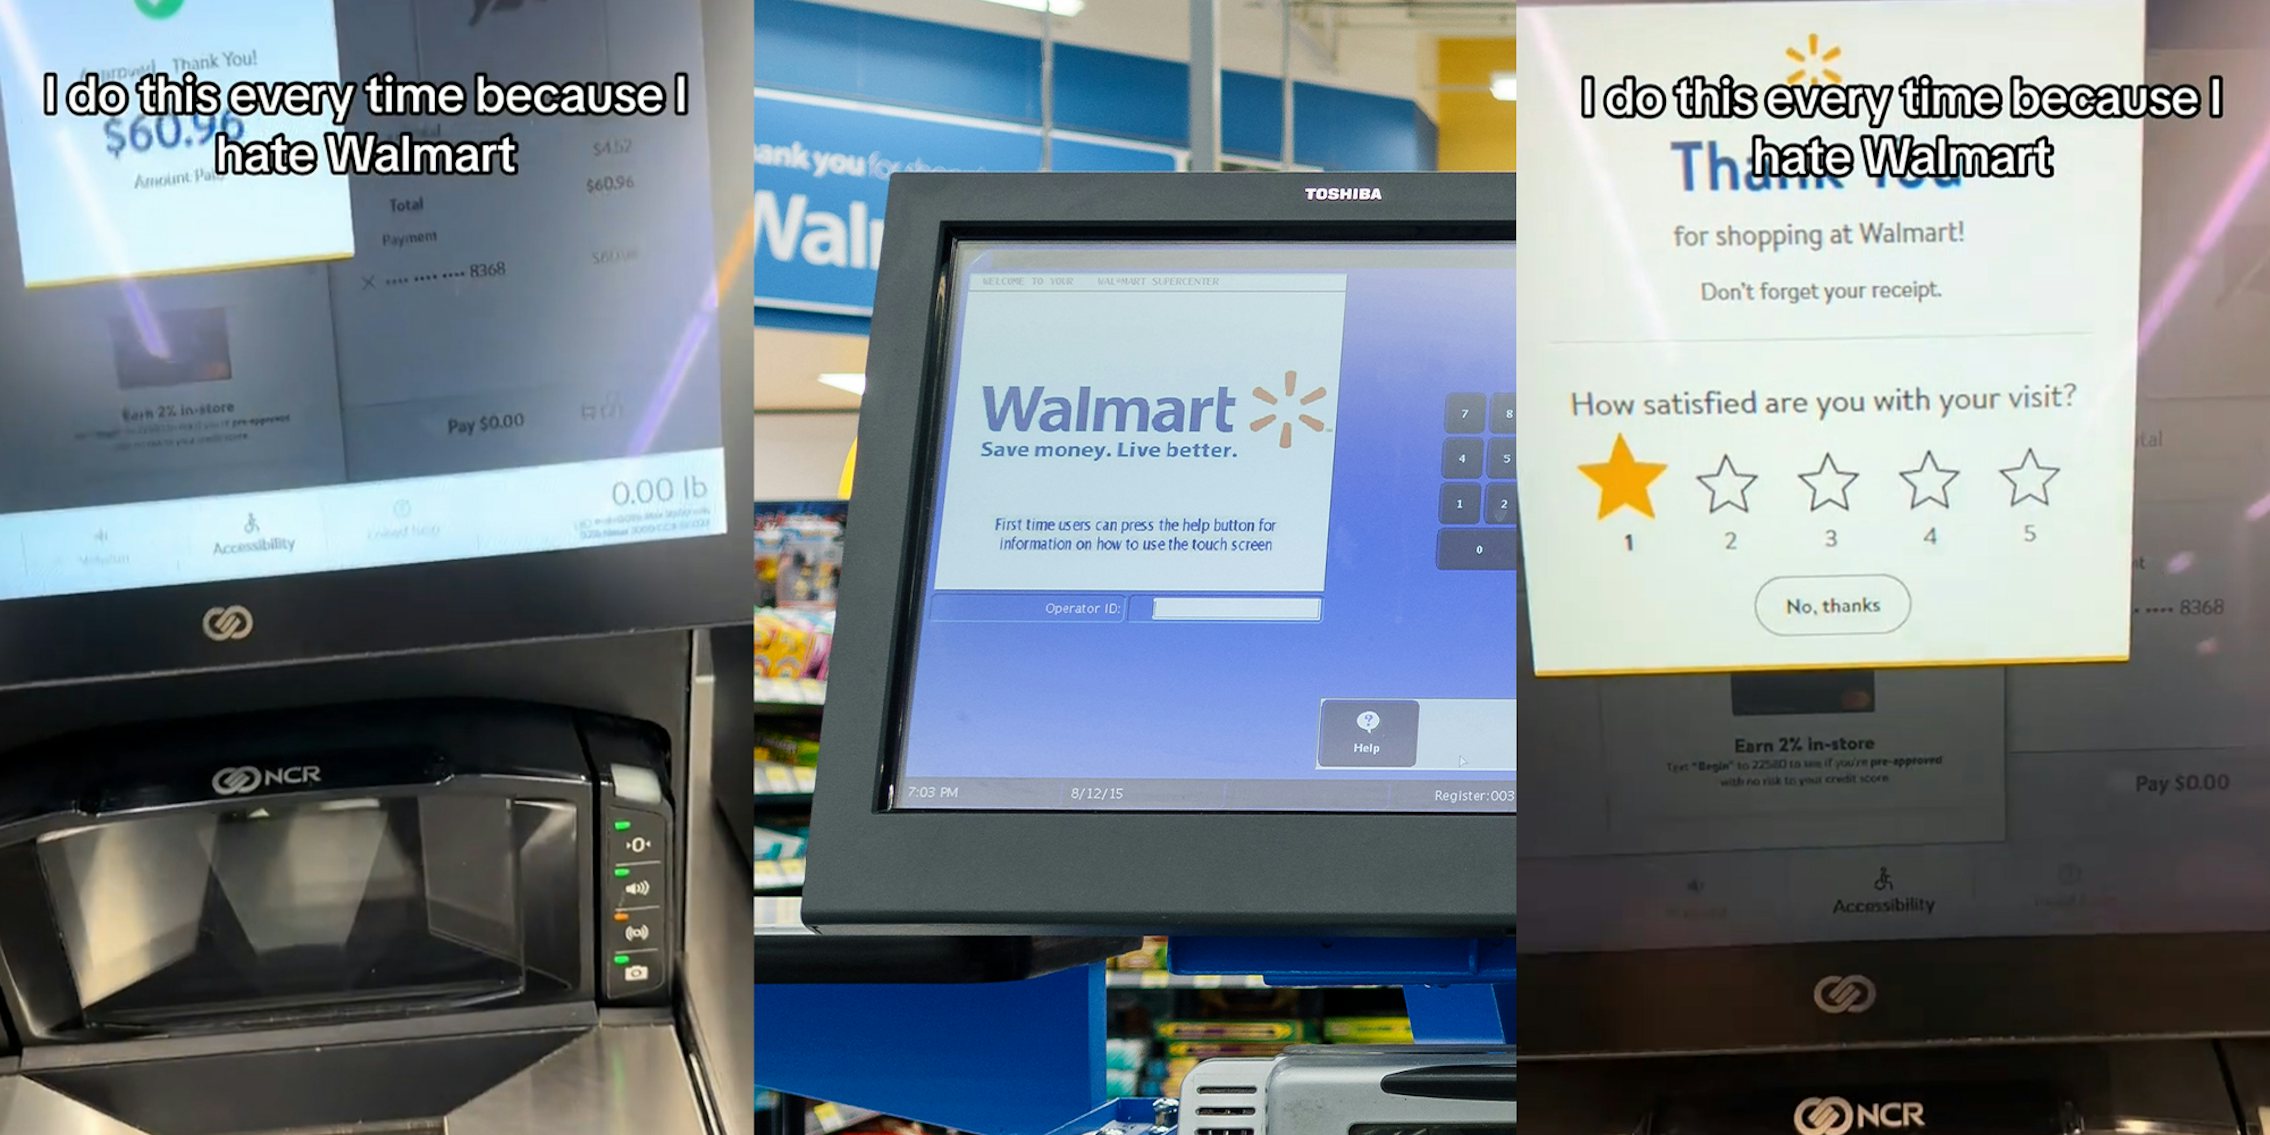 Walmart customer says they give 1 star at self-checkout because they ‘hate Walmart’